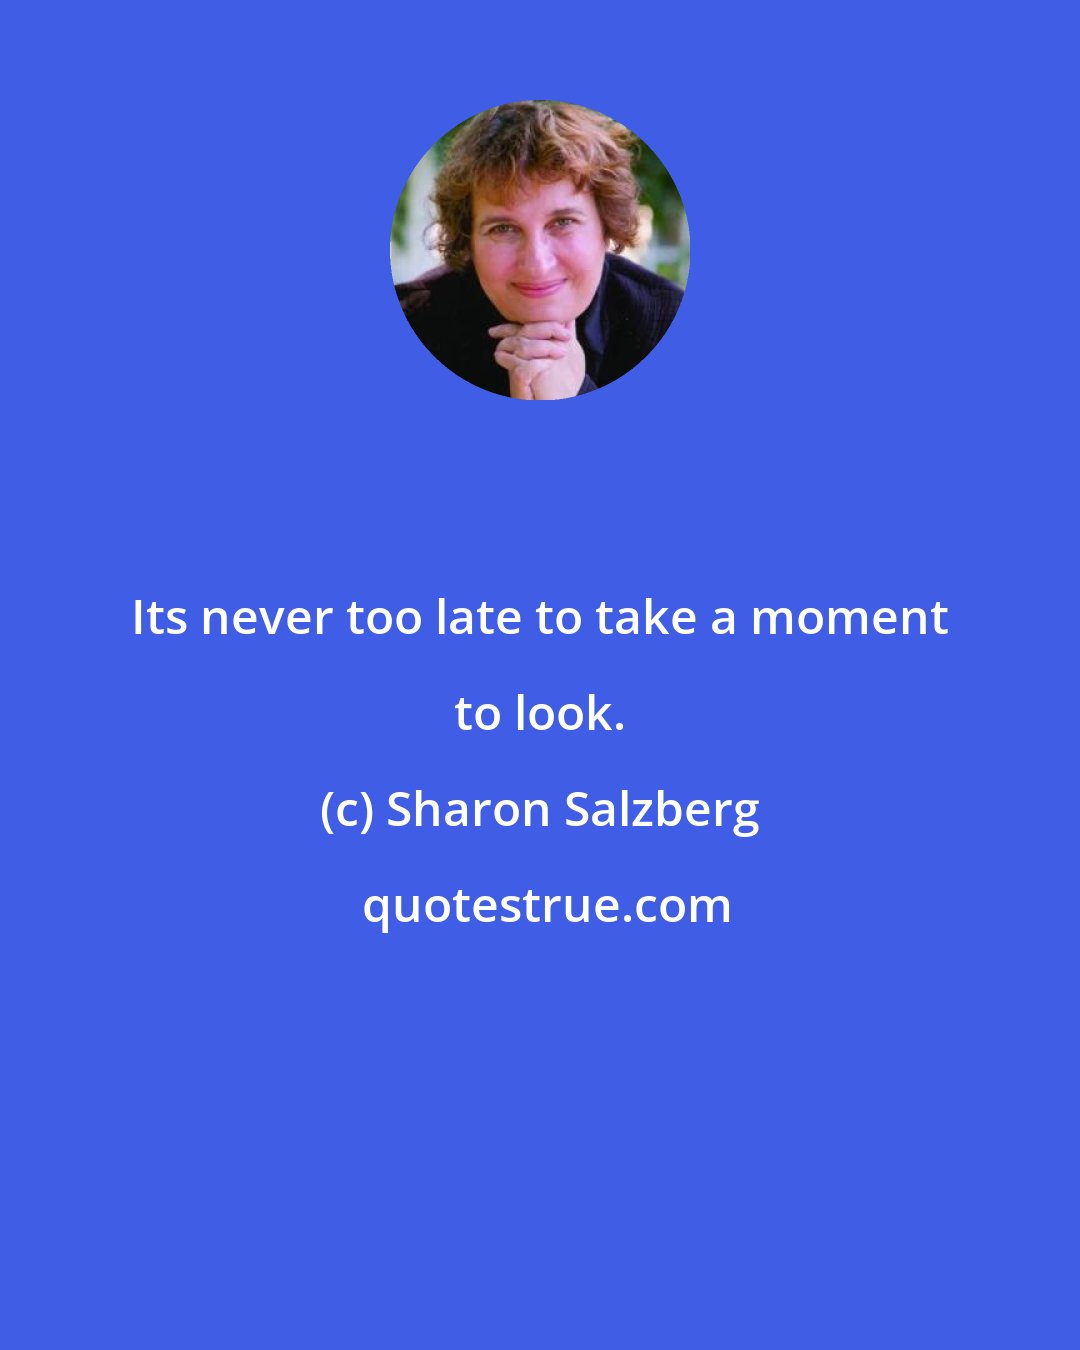 Sharon Salzberg: Its never too late to take a moment to look.